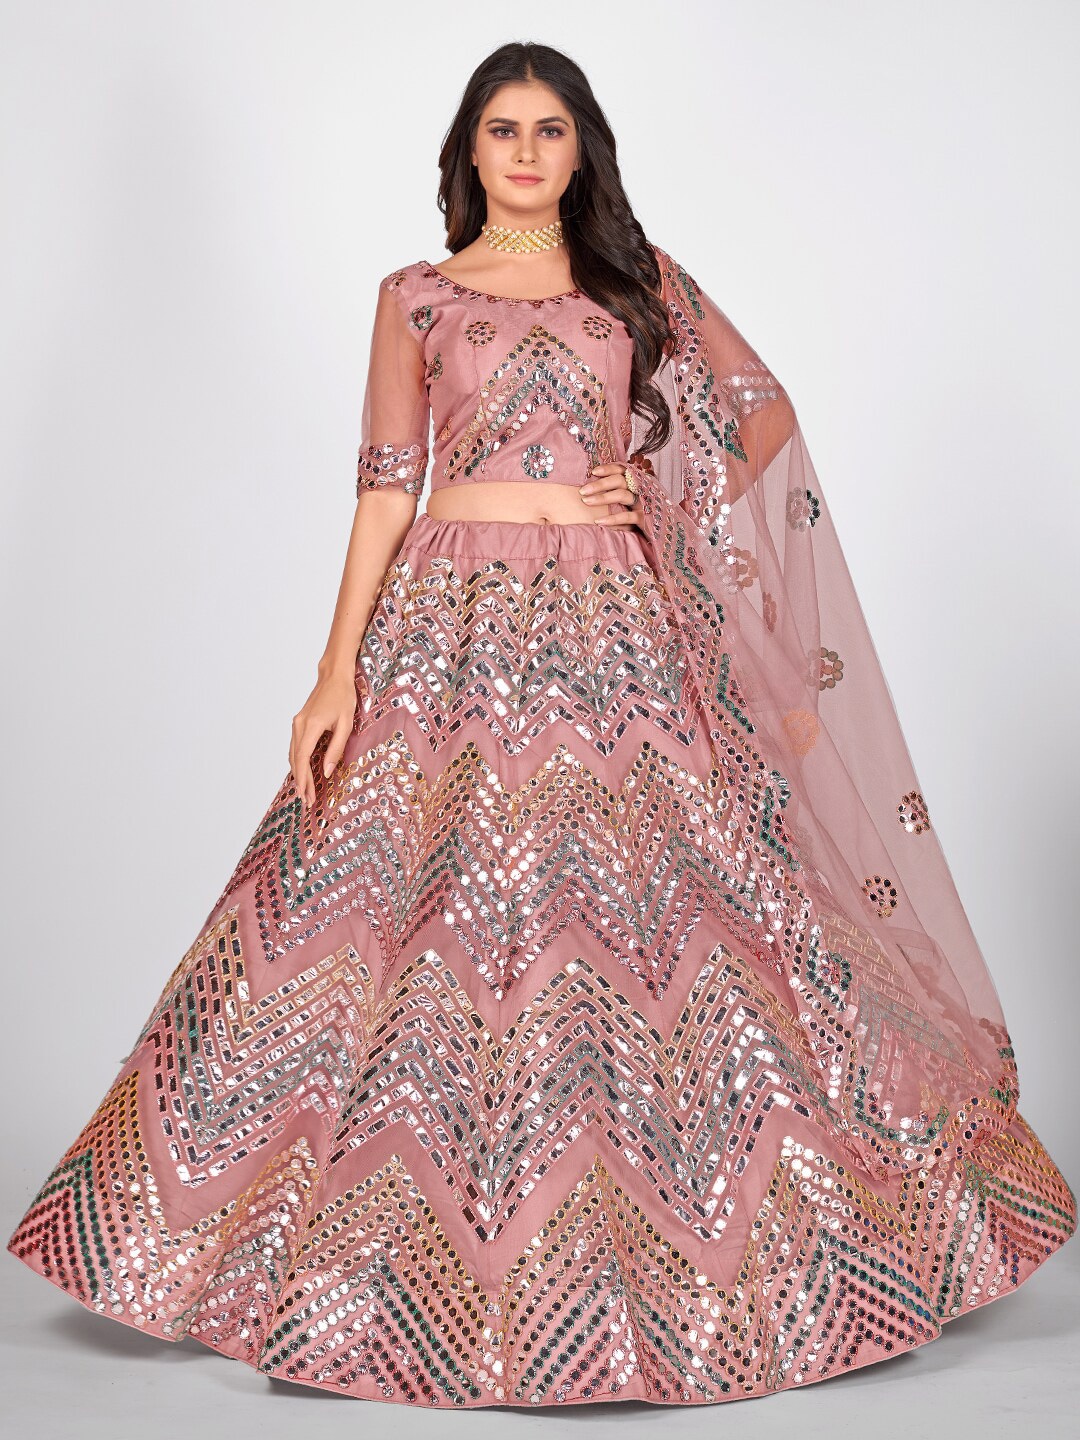 SHOPGARB Pink & Green Embellished Semi-Stitched Lehenga & Unstitched Blouse Price in India